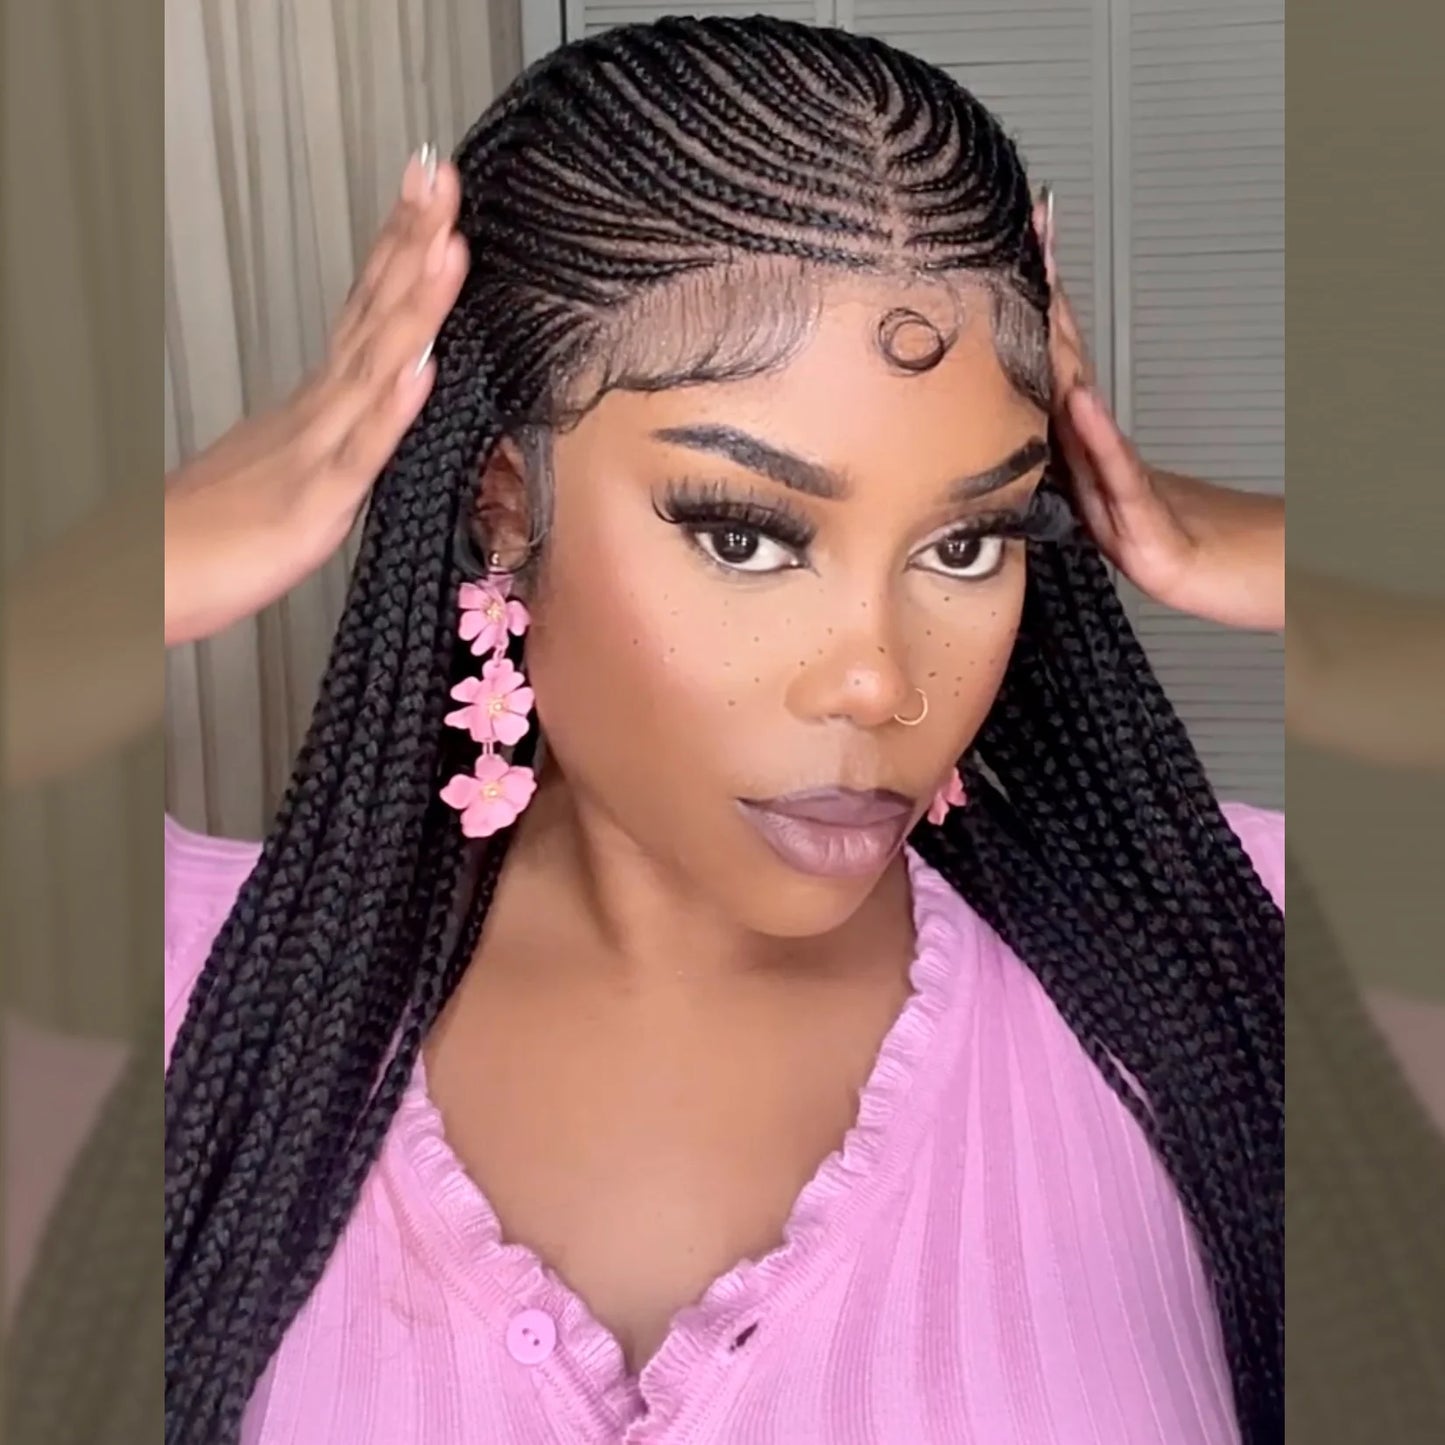 HAND BRAIDED 30 Inches 13x7 Fulani Braided Neat Braids Lace Front Wigs 200% Density-100% Handmade